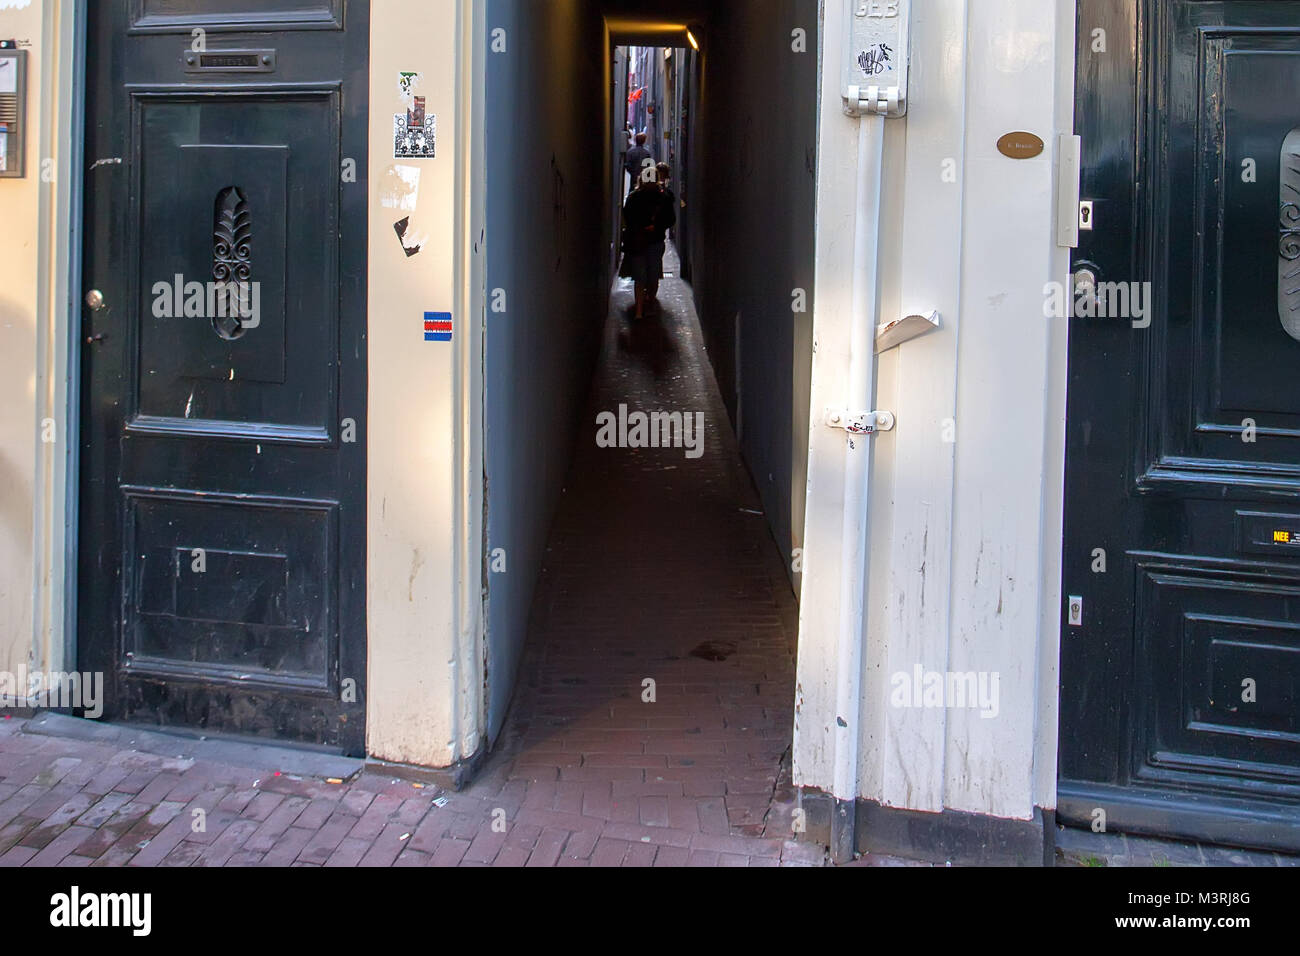 AMSTERDAM, THE NETHERLANDS - JUNE 10, 2014: Narrow passage in street in Amsterdam Stock Photo